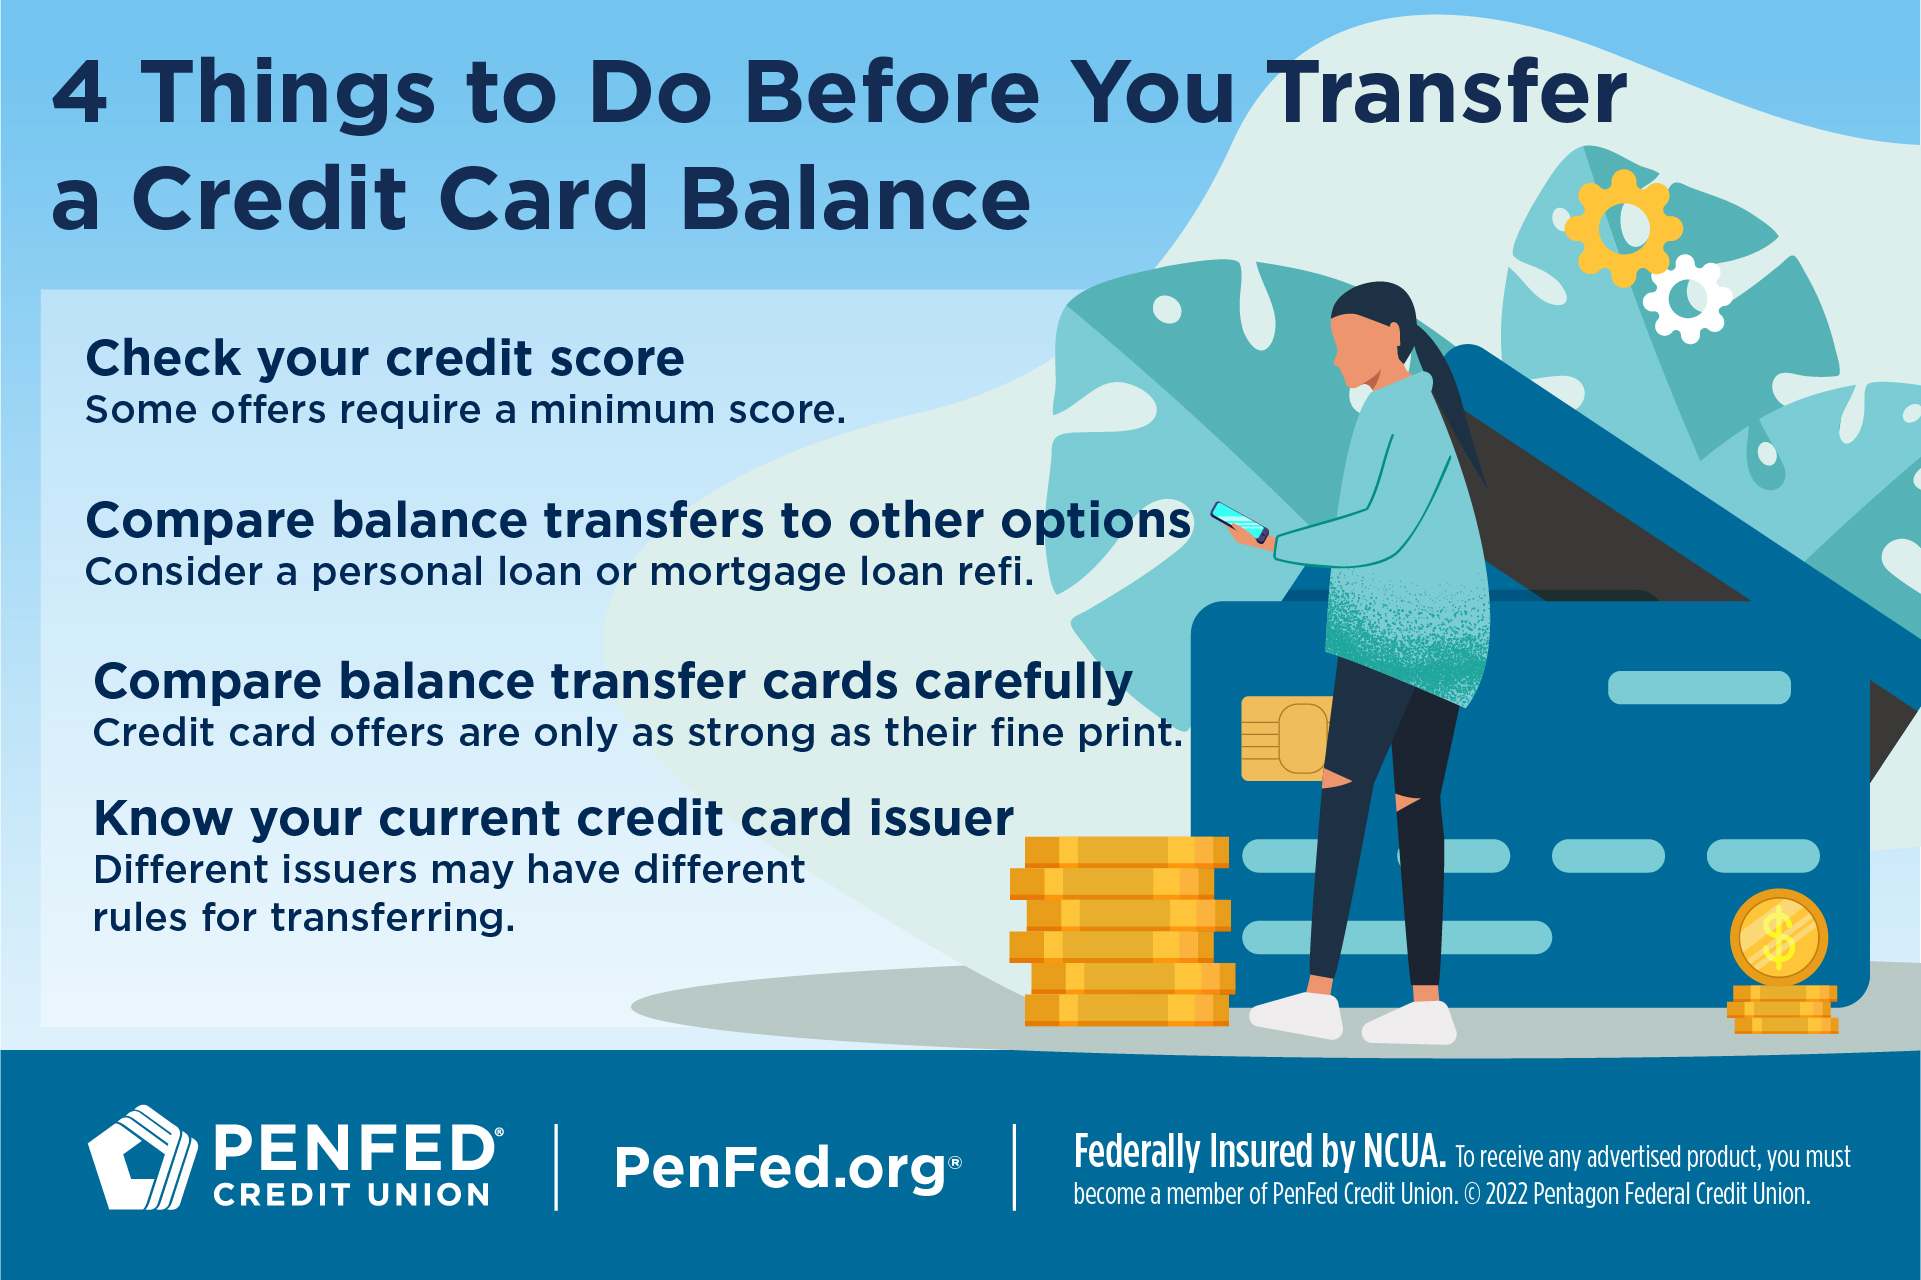 What to Look for in a Balance Transfer Credit Card